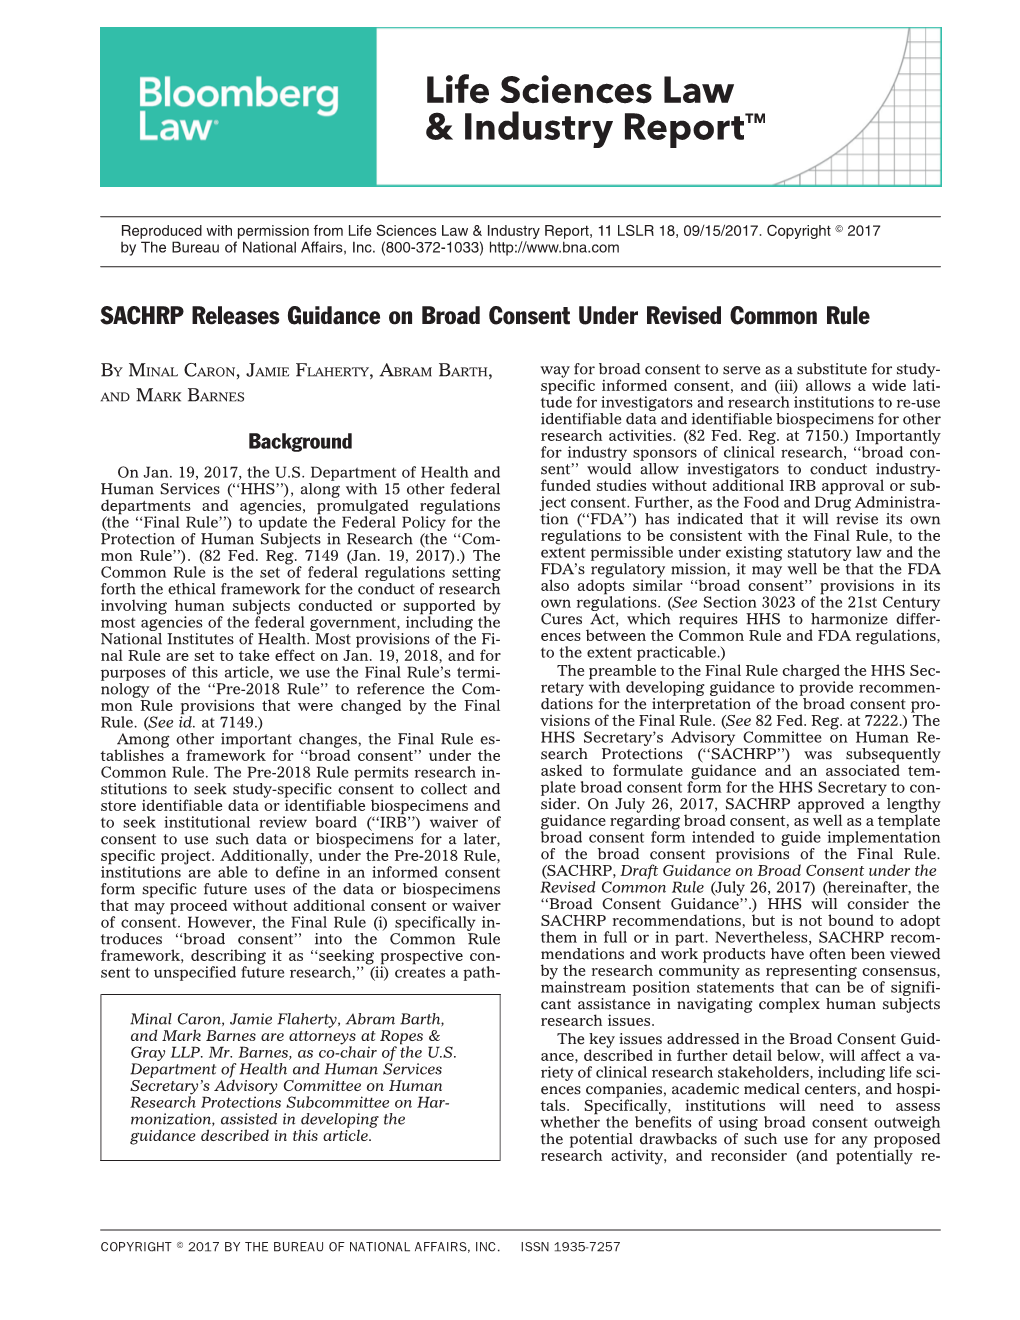 SACHRP Releases Guidance on Broad Consent Under Revised Common Rule